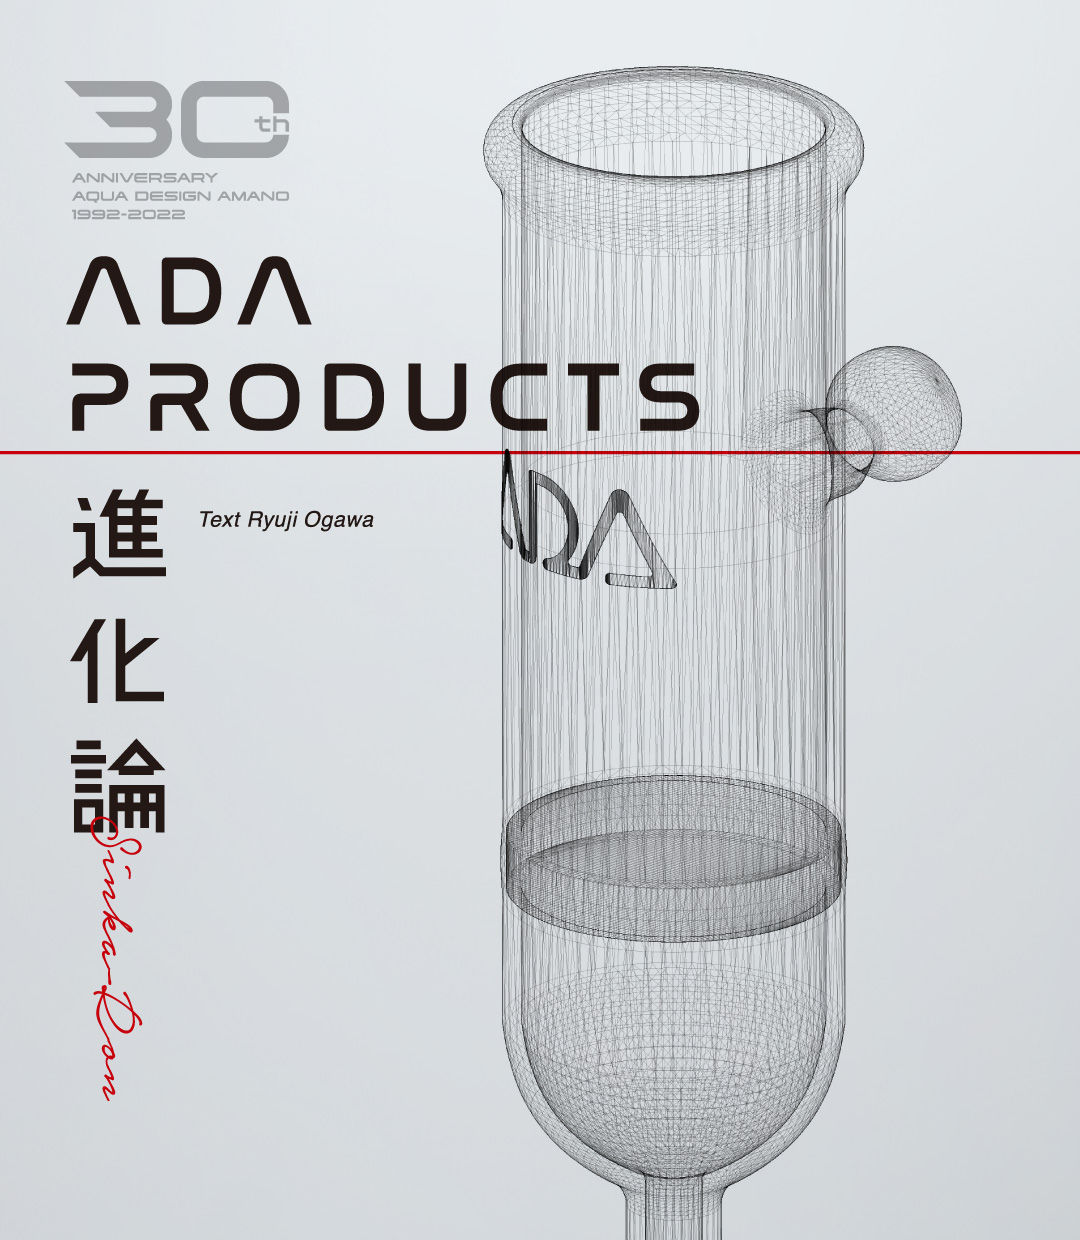 ADA PRODUCTS -The theory of evolution-  #1. POLLEN GLASS SERIES